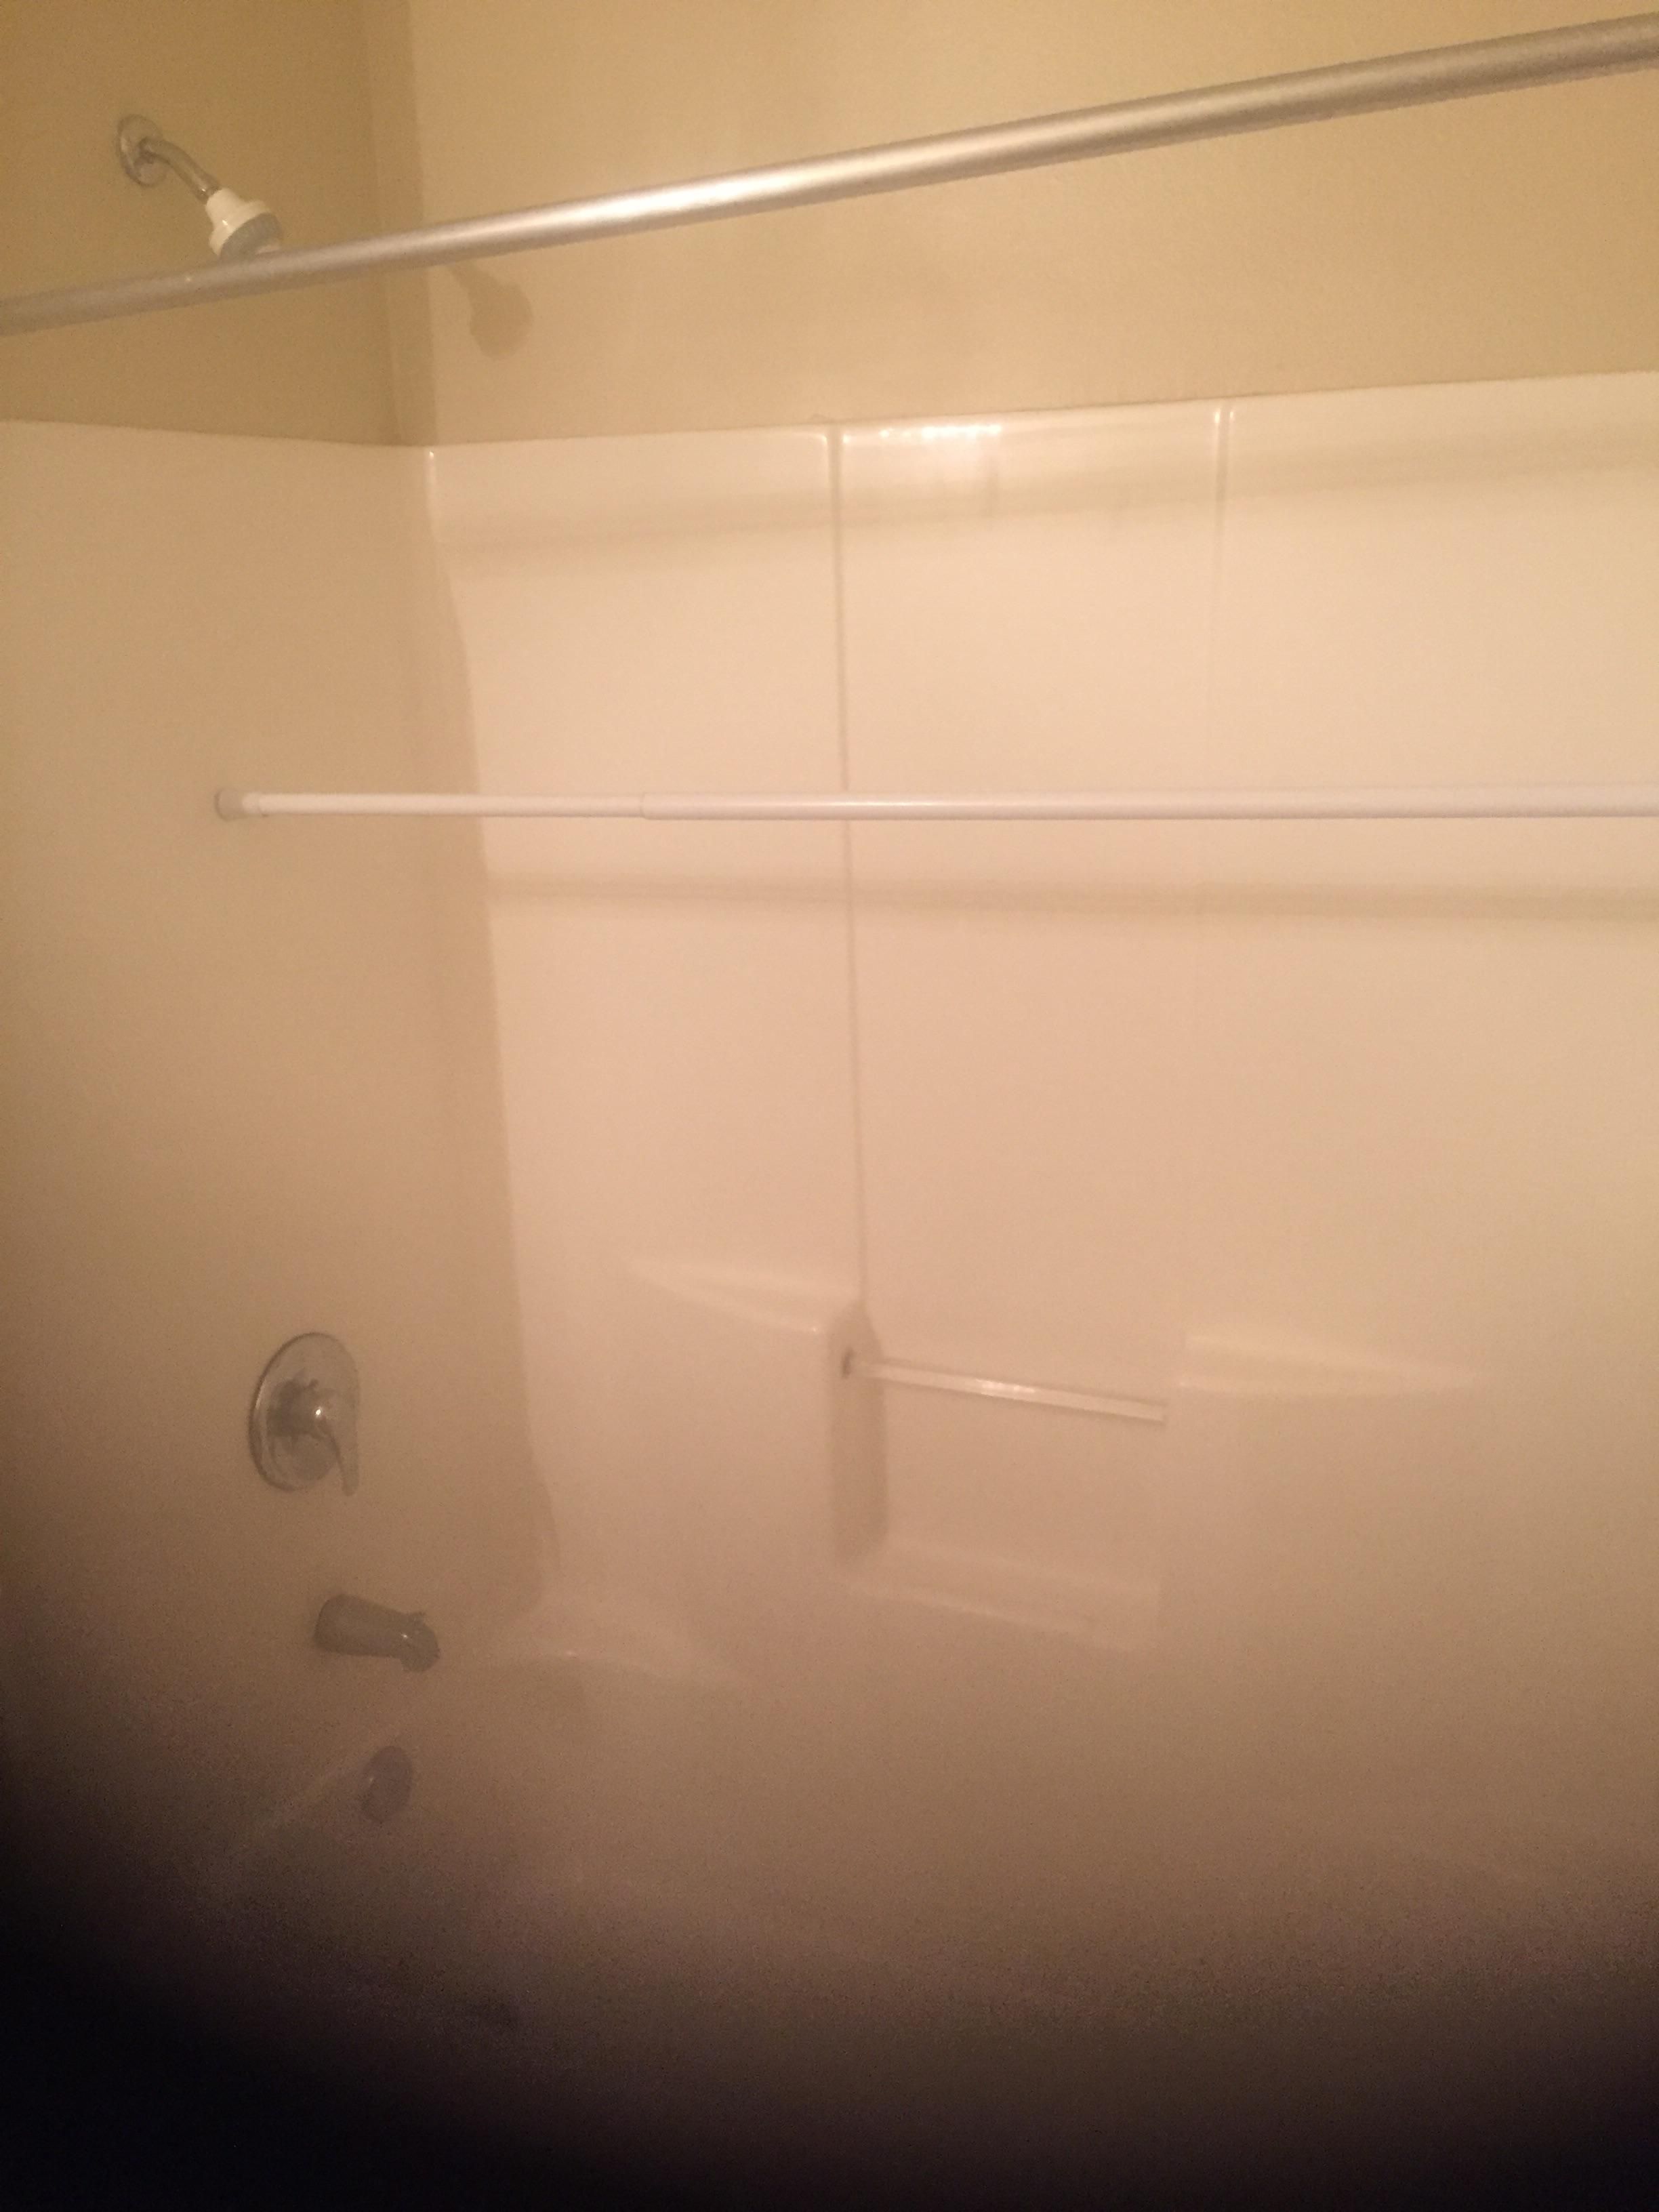 Roommate thinks he is required to have a shower rod in the middle of his bath. We sent him a fake email from our apartment complex that he has to keep it there for a couple of weeks.